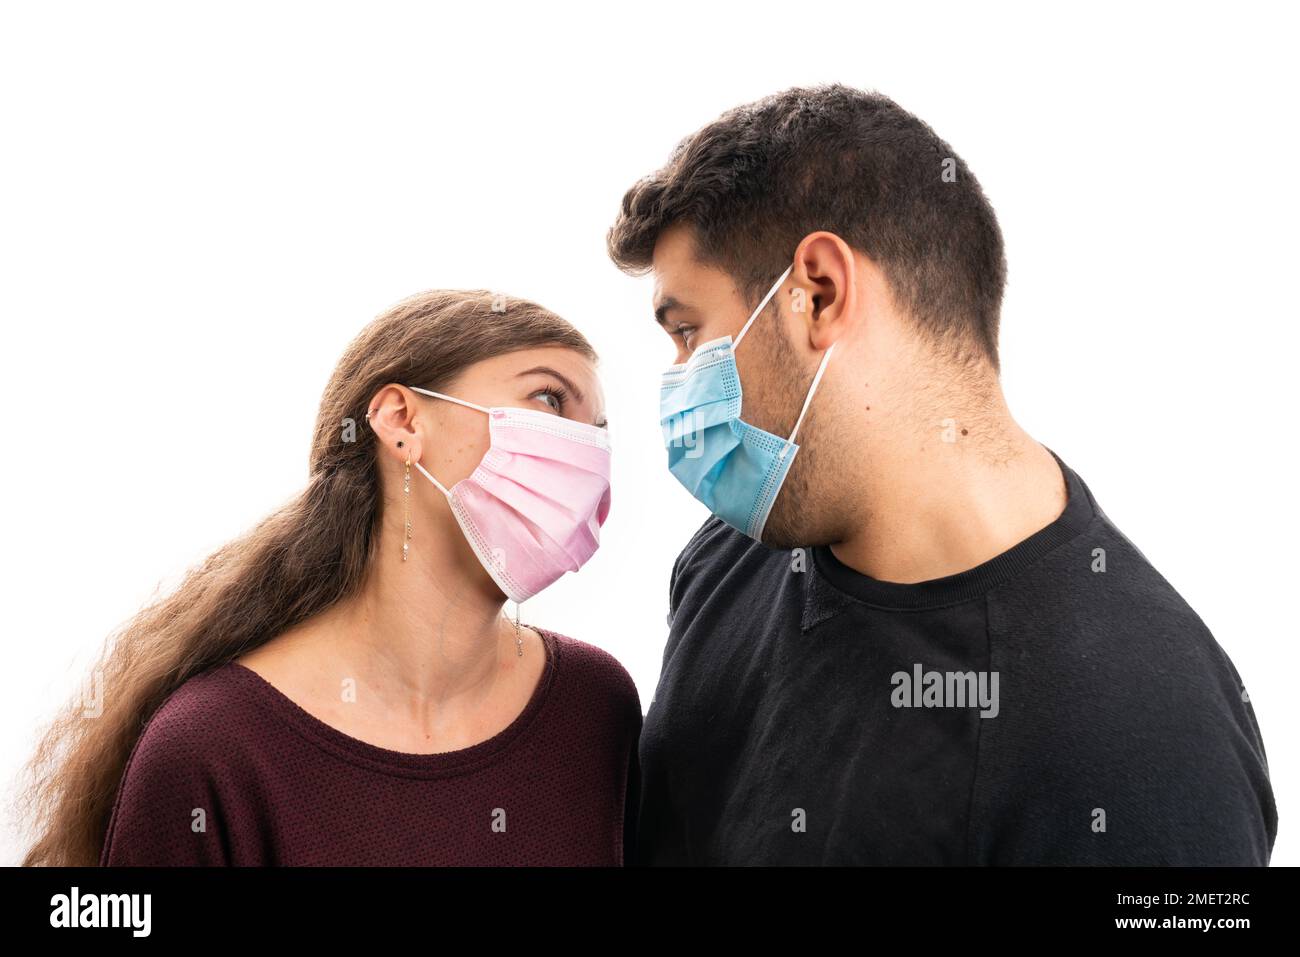 Girlfriend wearing pink disposable medical or surgical mask as sars covid19 influneza prevention looking at cute boyfriend with blue protective face c Stock Photo